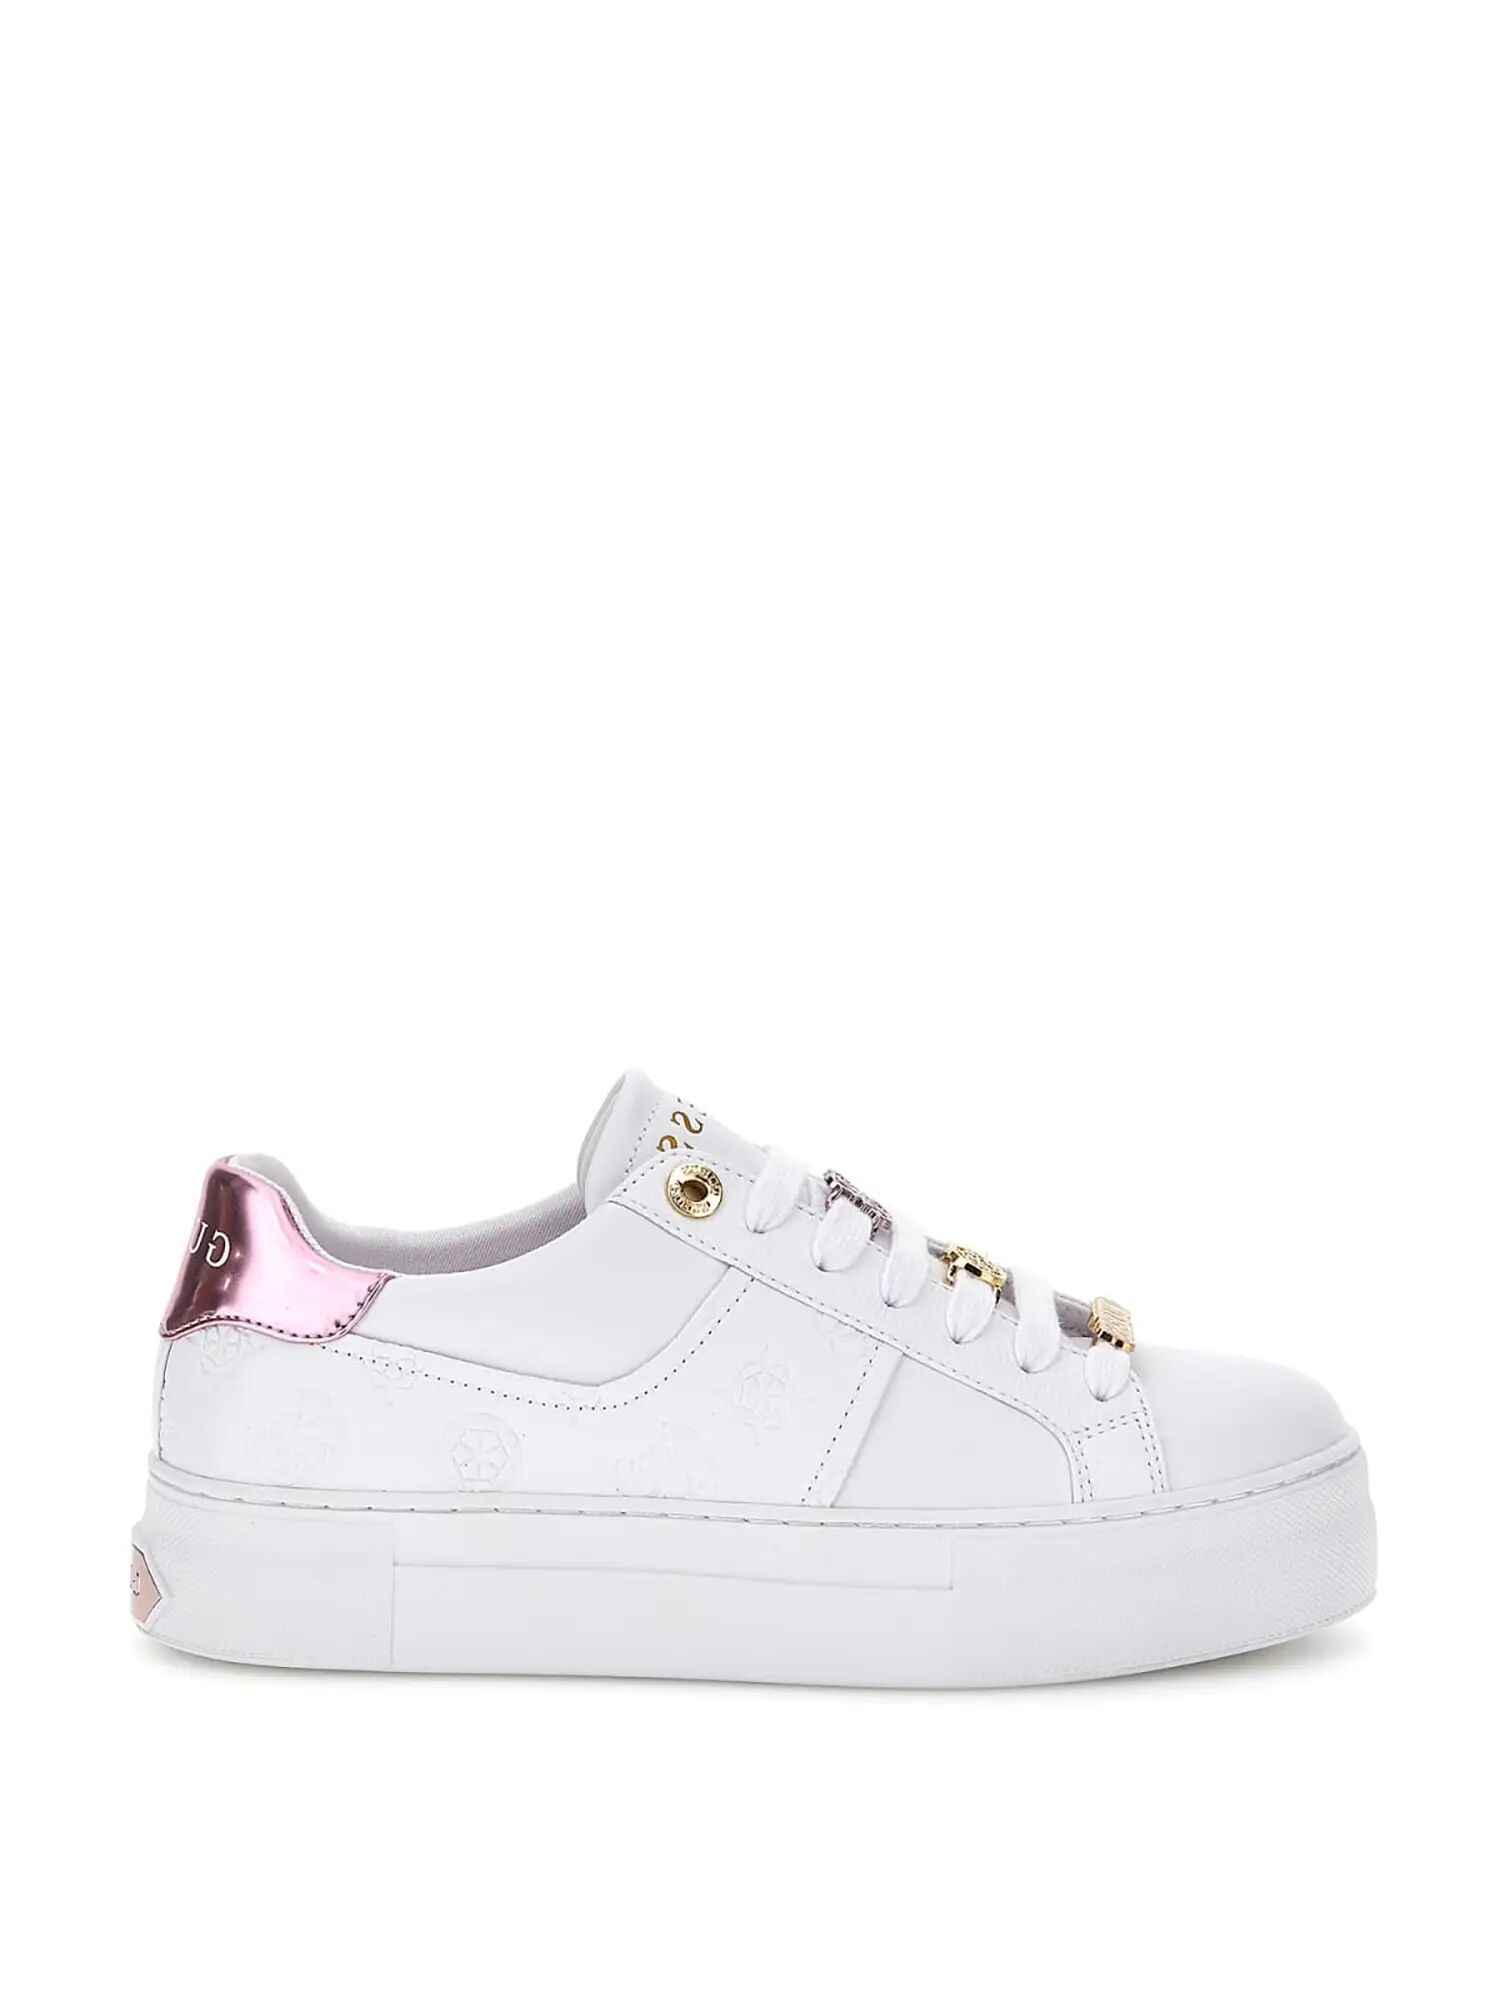 Guess Sneakers Bianche Donna BIANCO/ROSA 35